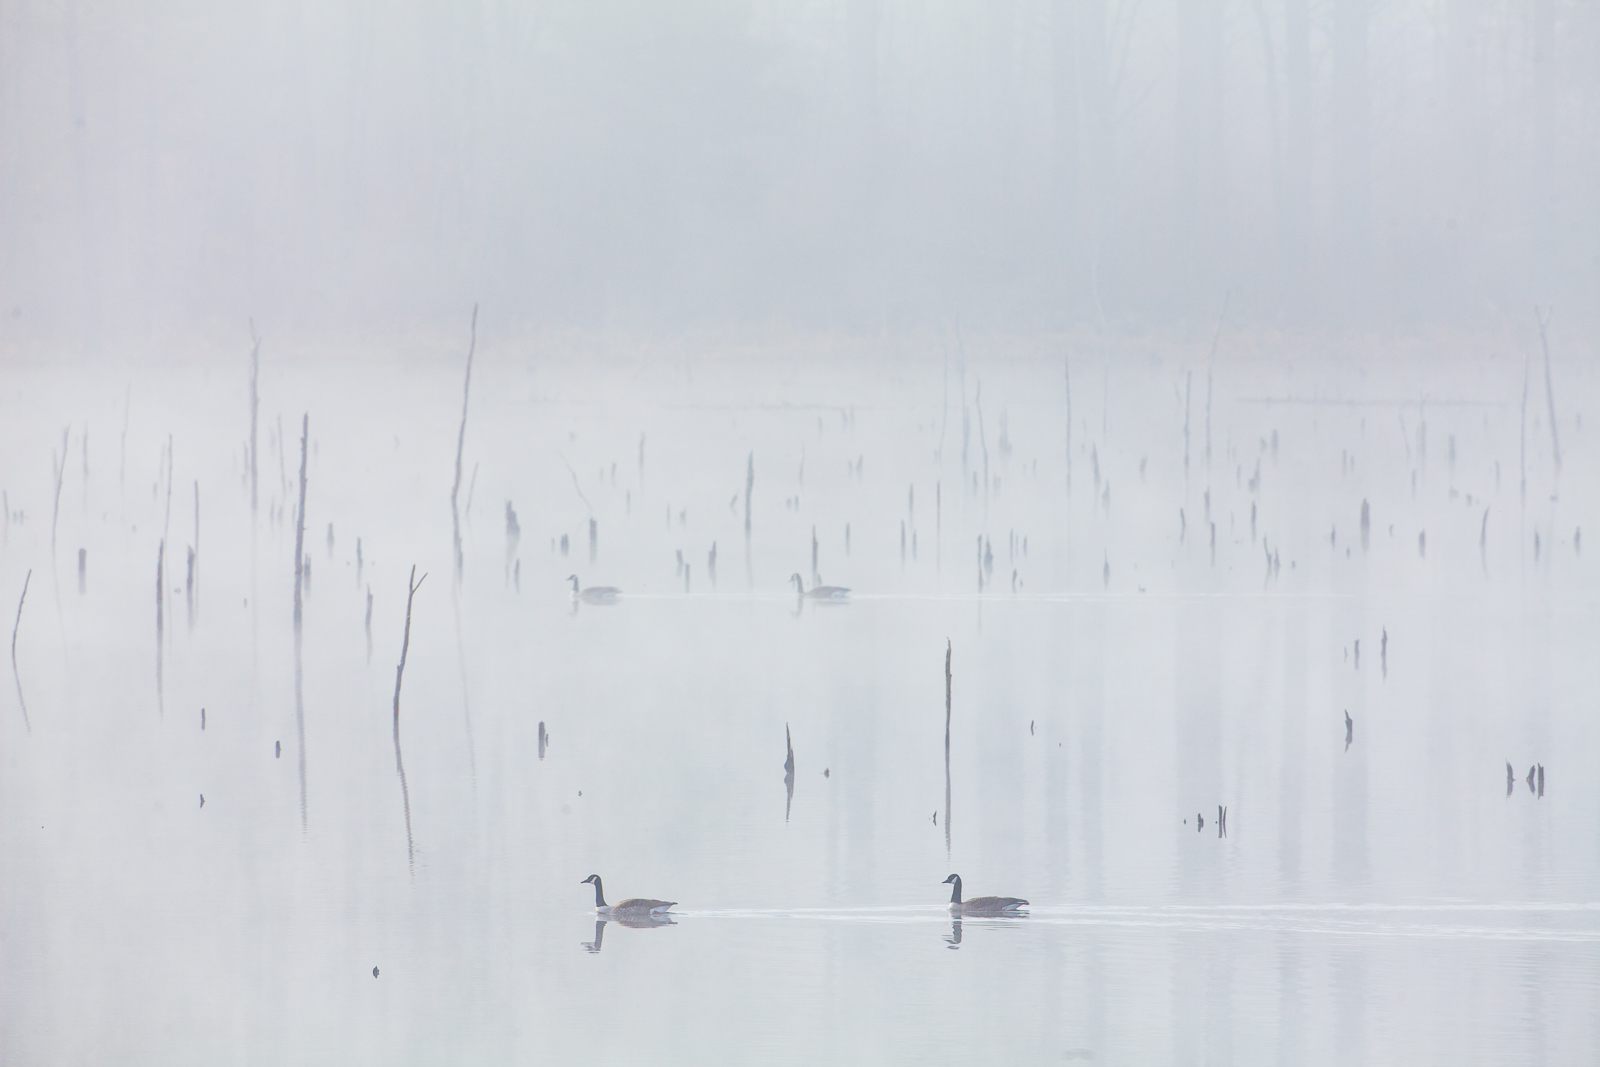 As synchronized swimmers travel through the waters these couples tour the misty morning pond.